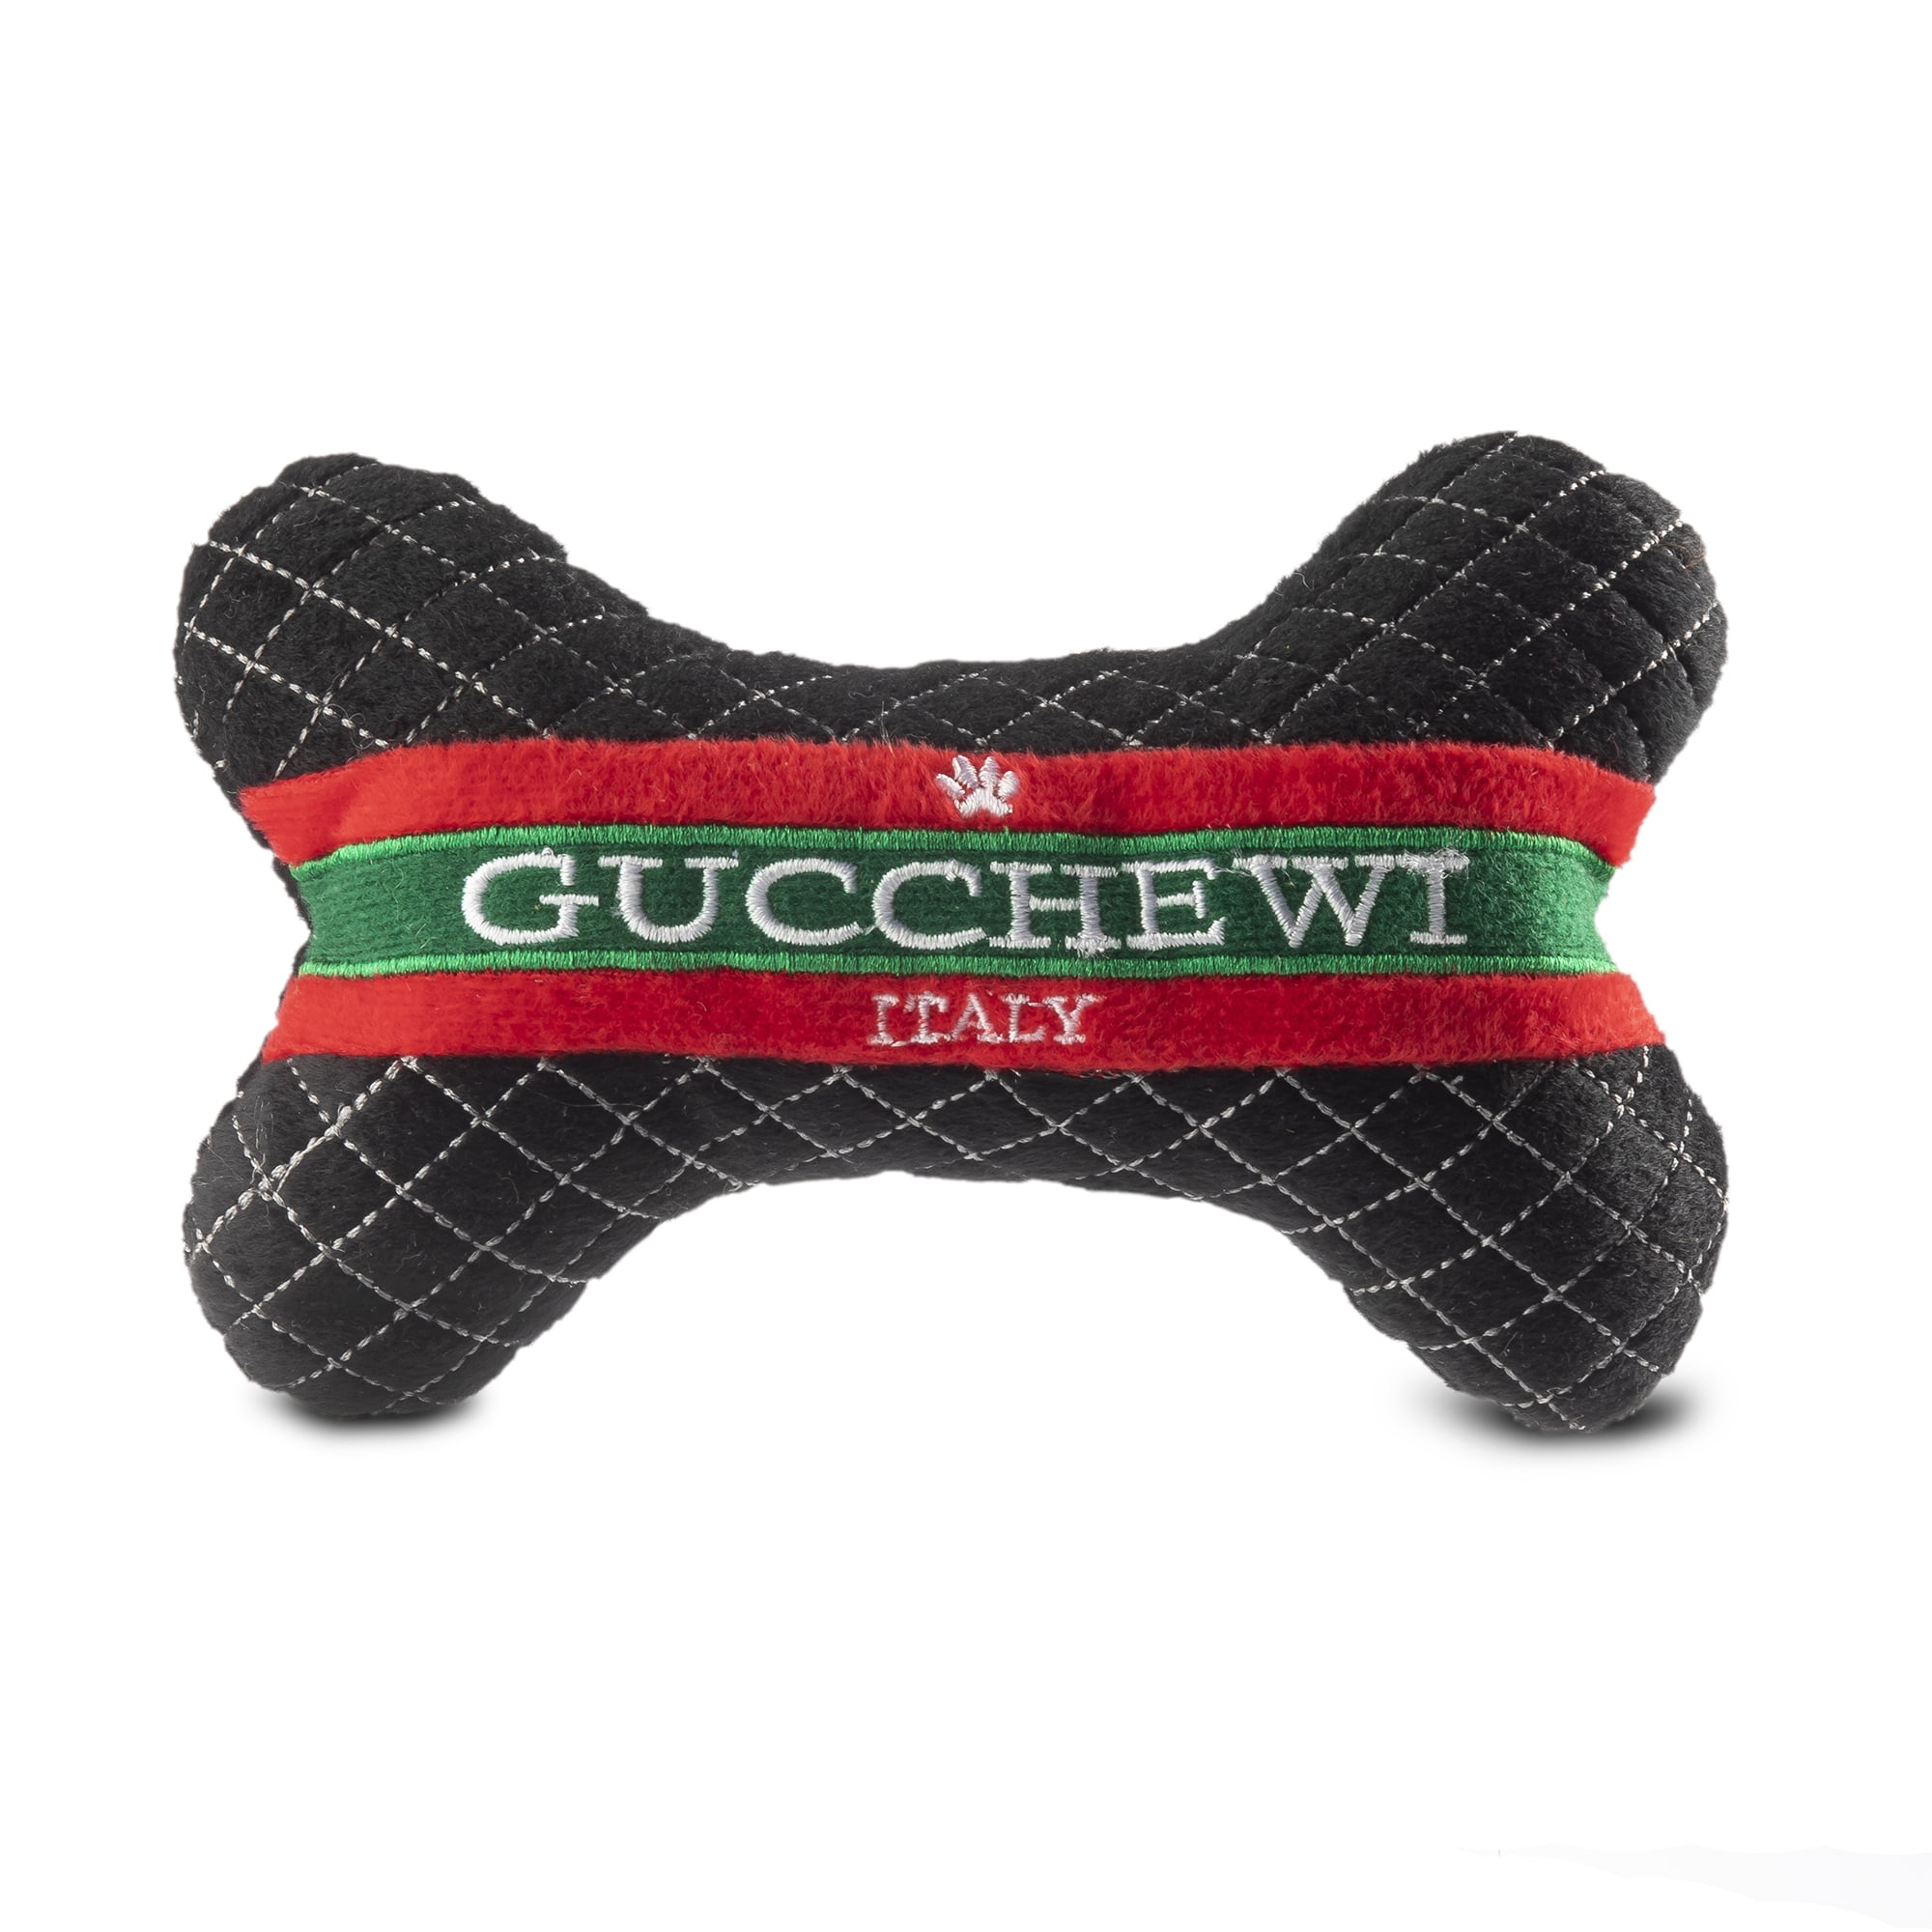 Dog Diggin Designs Runway Pup Collection | Unique Squeaky Plush Dog Toys Prt--Porter Dog Bones, Balls & More, Size: Small, Other